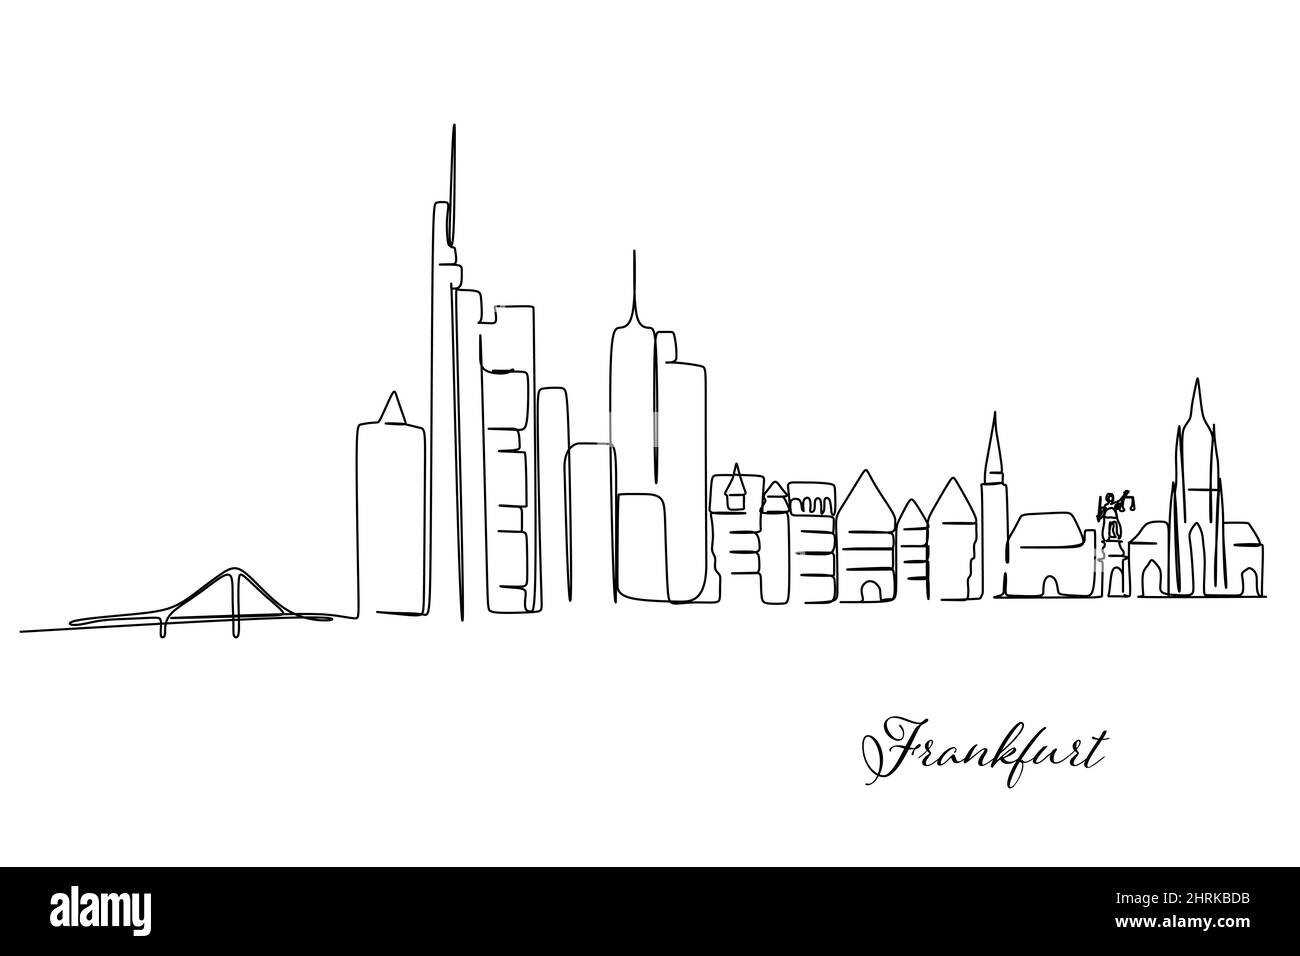 Single continuous line drawing of Frankfurt city skyline, Germany. Famous skyscraper landscape. World travel wall decor home art poster print concept. Stock Photo